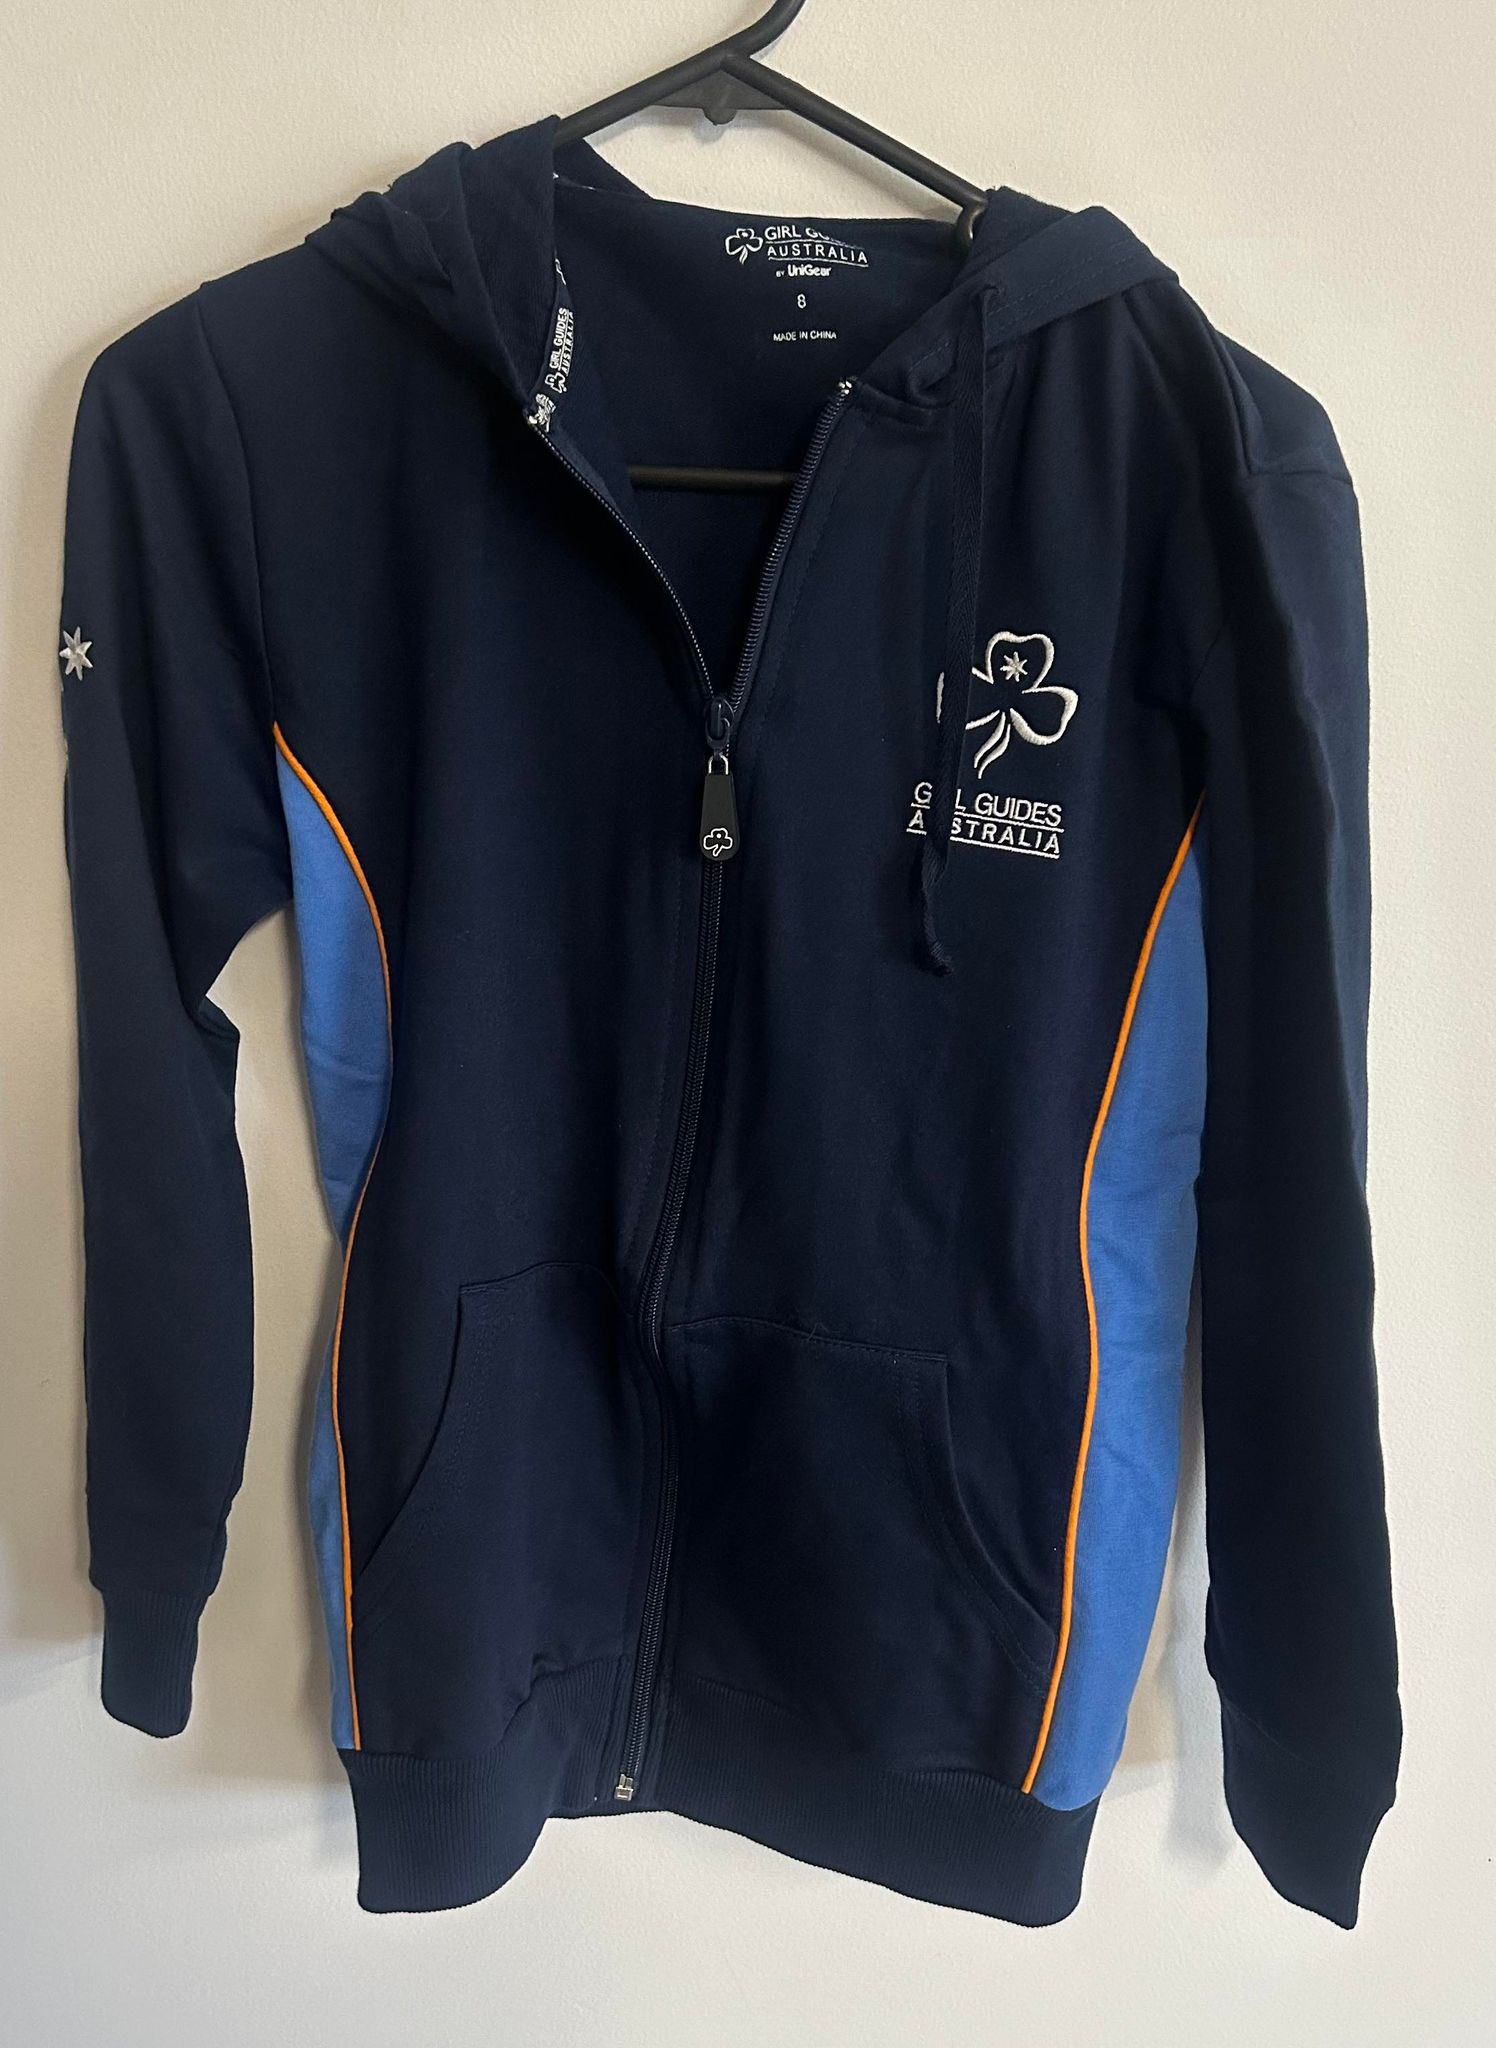 a navy blue hoodie with light blue in the side inserts